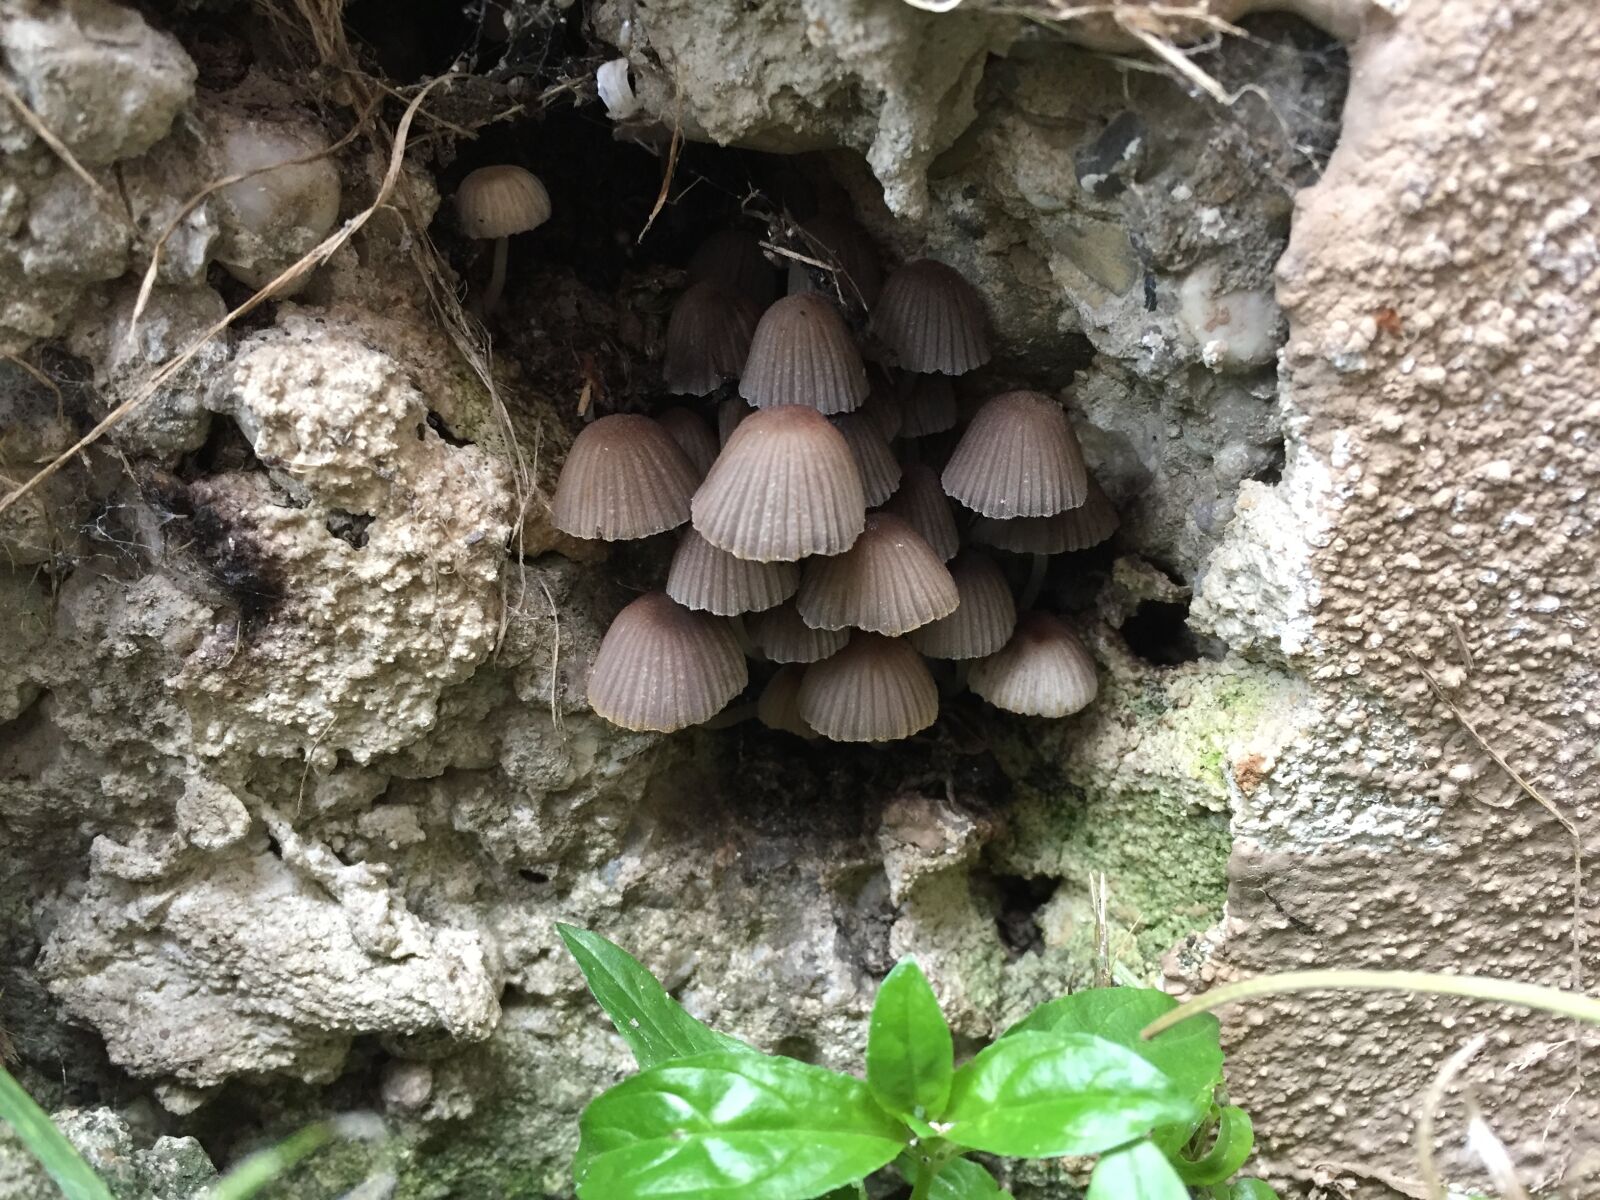 Apple iPhone 6 + iPhone 6 back camera 4.15mm f/2.2 sample photo. Mushrooms, nature, forest photography